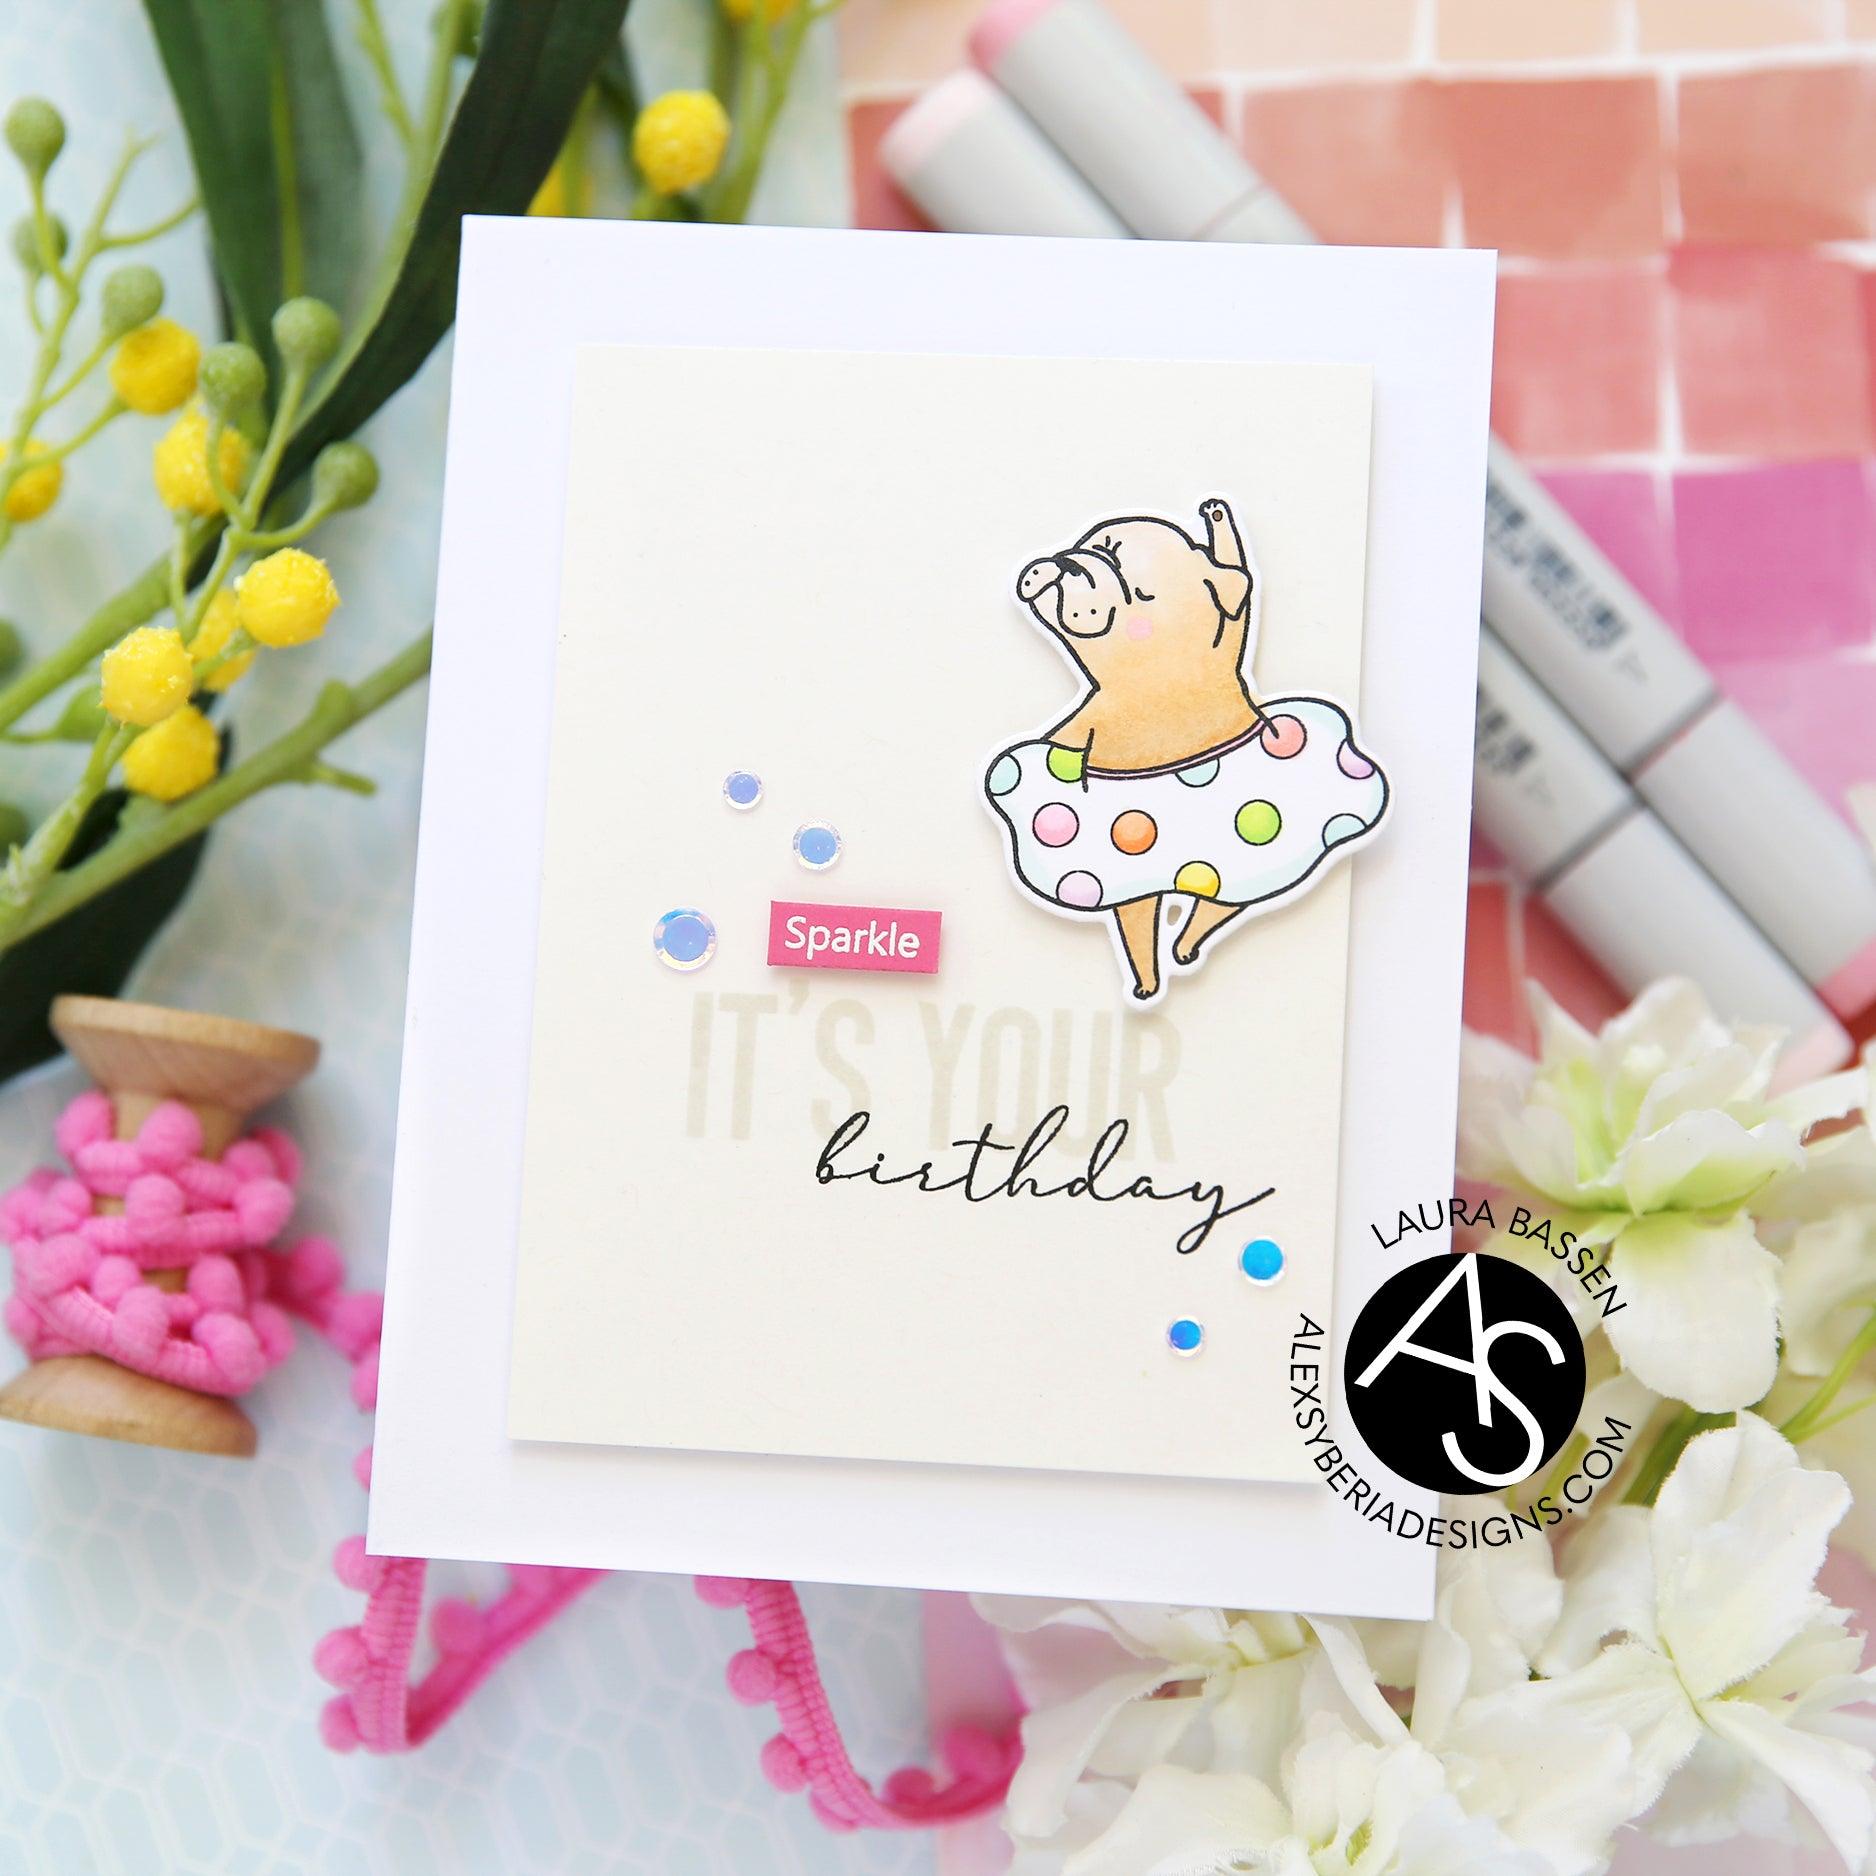 alex-syberia-designs-birthday-wishes-stamp-set-cardmaking-scrapbooking-birthday-celebrate-your-day-sentiments-dancing-dog-laura-fadora-cards-blog